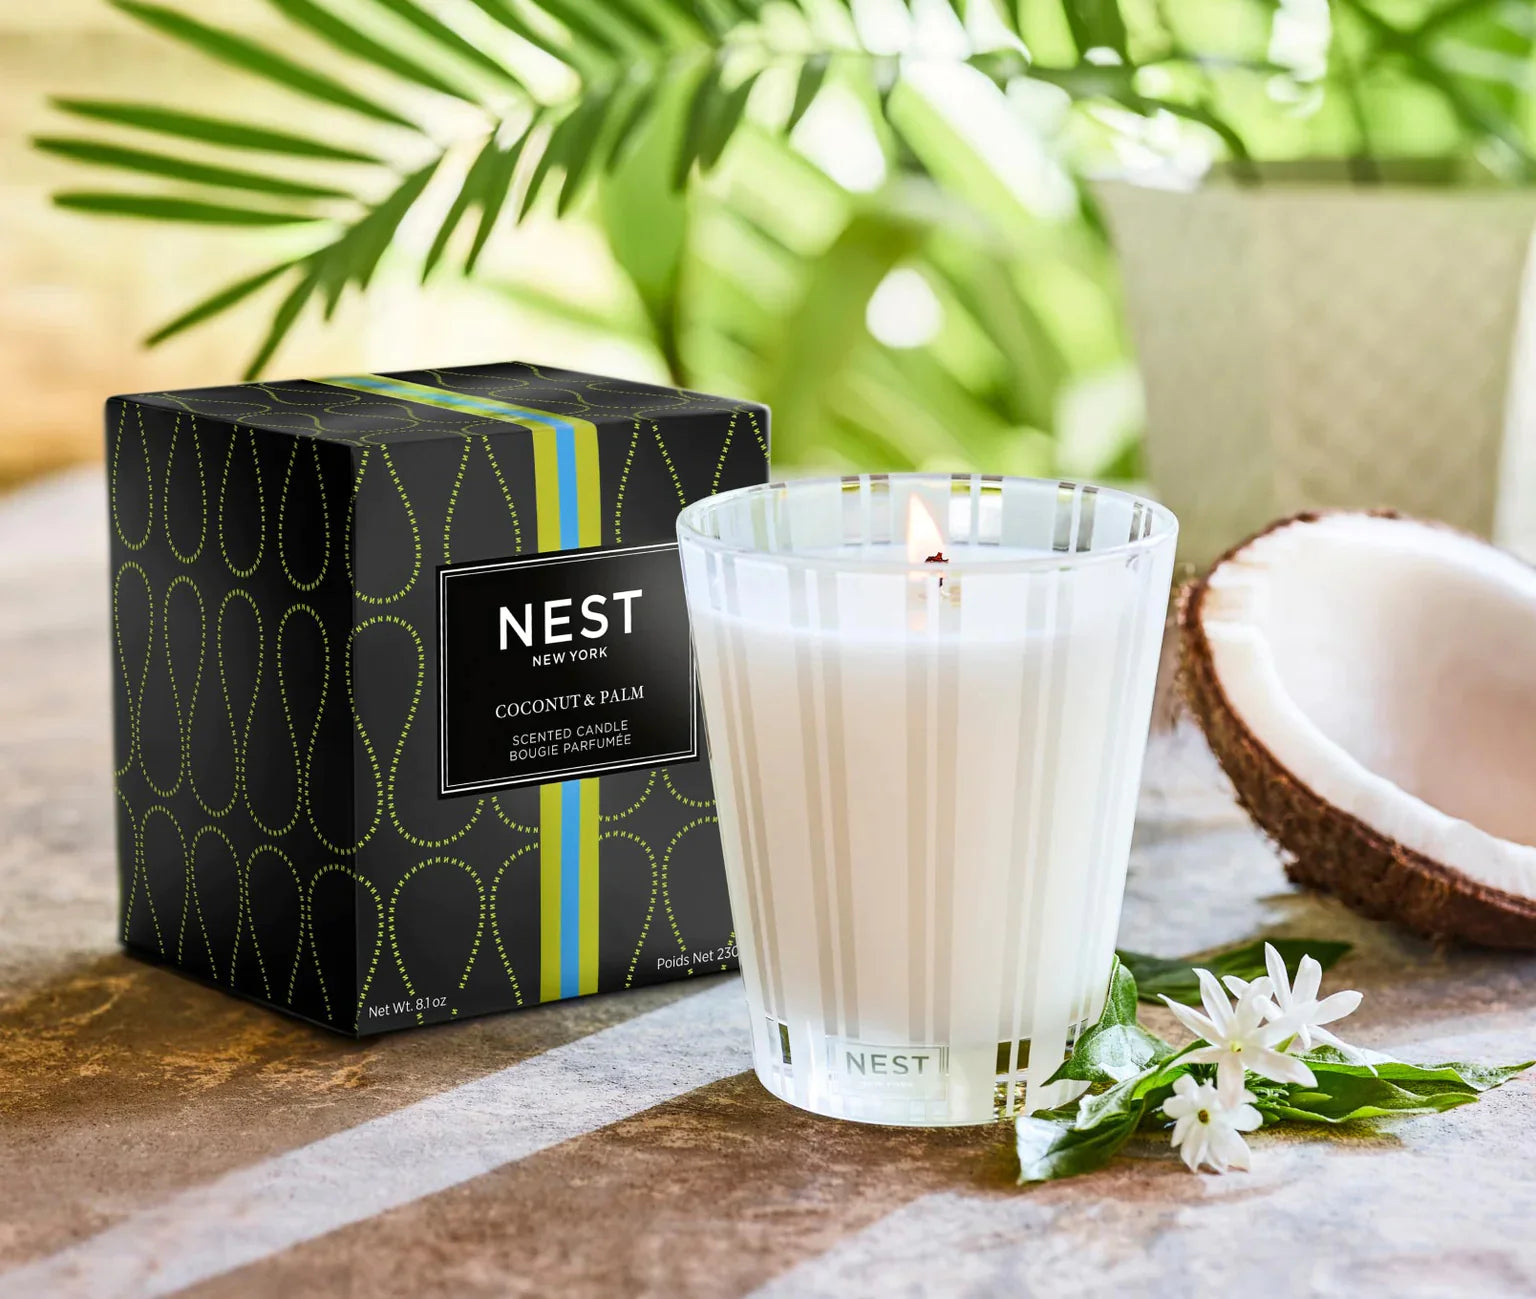 Coconut & Palm Classic Candle 8.1 oz by Nest New York